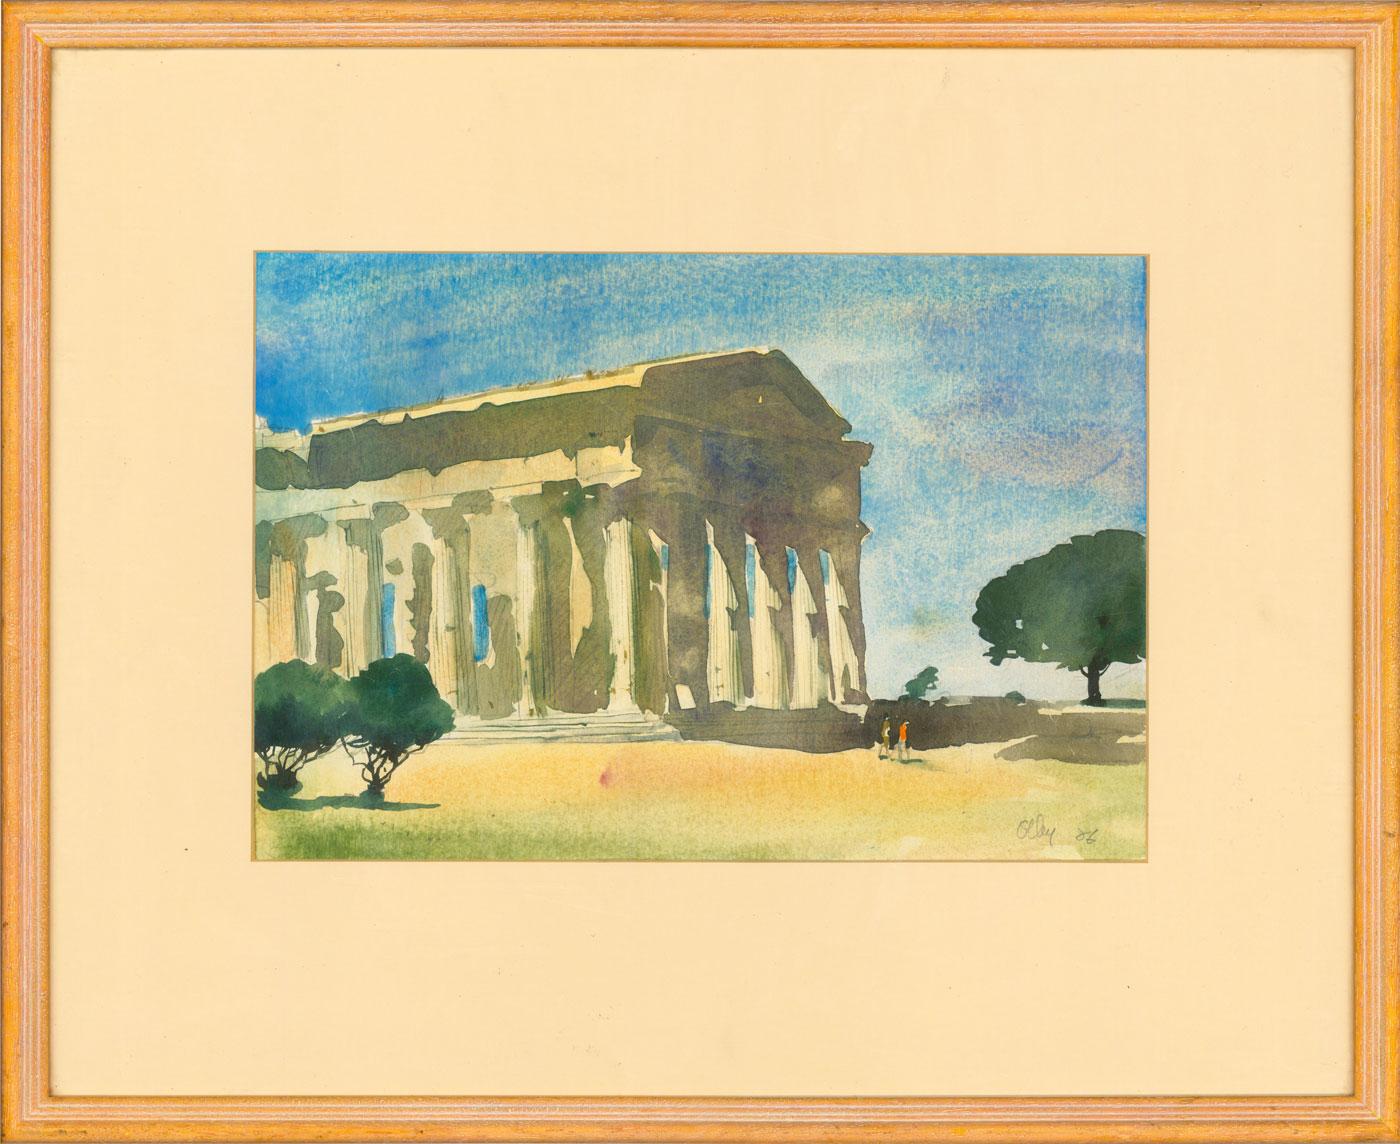 A very fine and dynamic watercolour with graphite details, by the listed British artist Ronald Olley (b.1926), depicting the East and South faÃ§ade of the Second Temple of Hera at Paestum, Southern Italy, with two figures in the landscape. Paestum